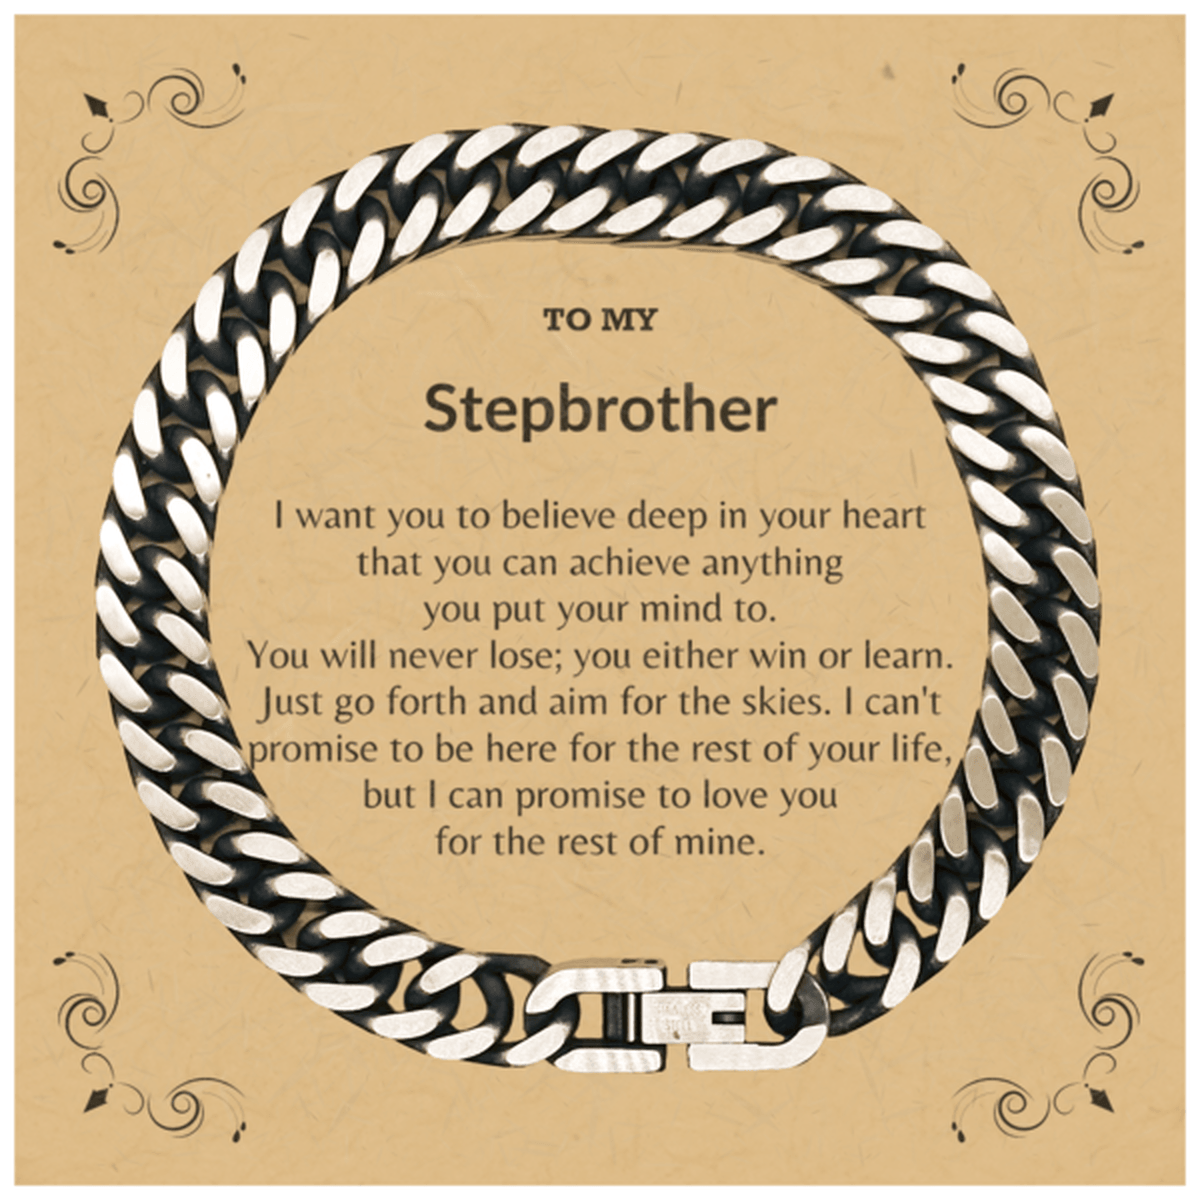 Motivational Stepbrother Cuban Link Chain Bracelet, I can promise to love you for the rest of my life, Birthday, Christmas Holiday Jewelry Gift - Mallard Moon Gift Shop